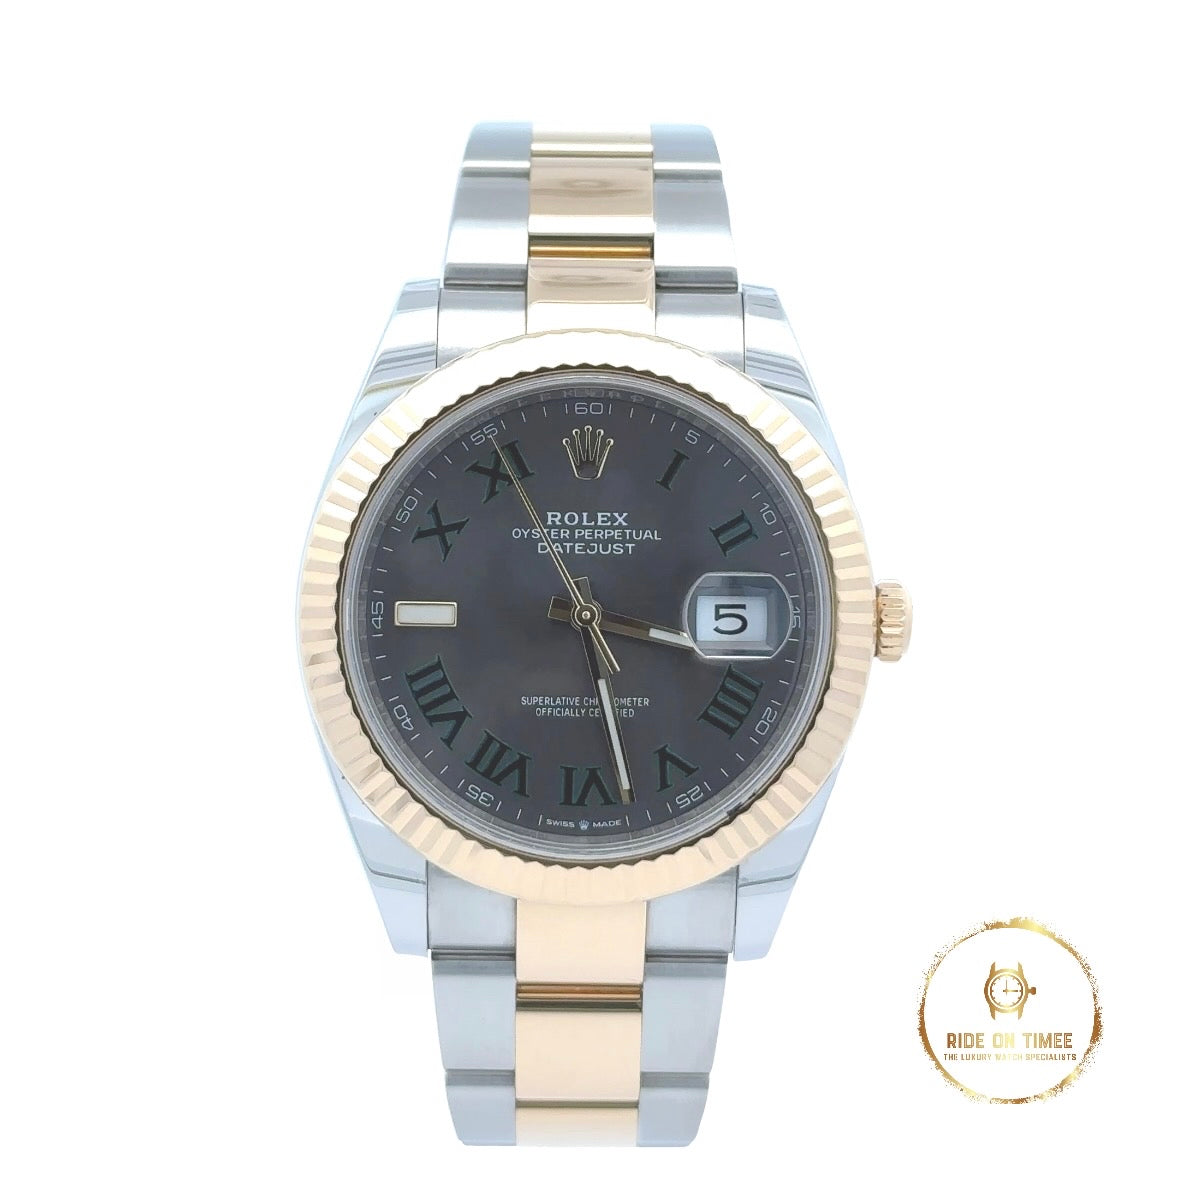 Rolex Datejust 41mm Factory Wimbledon Dial ‘126333’ - Ride On Timee